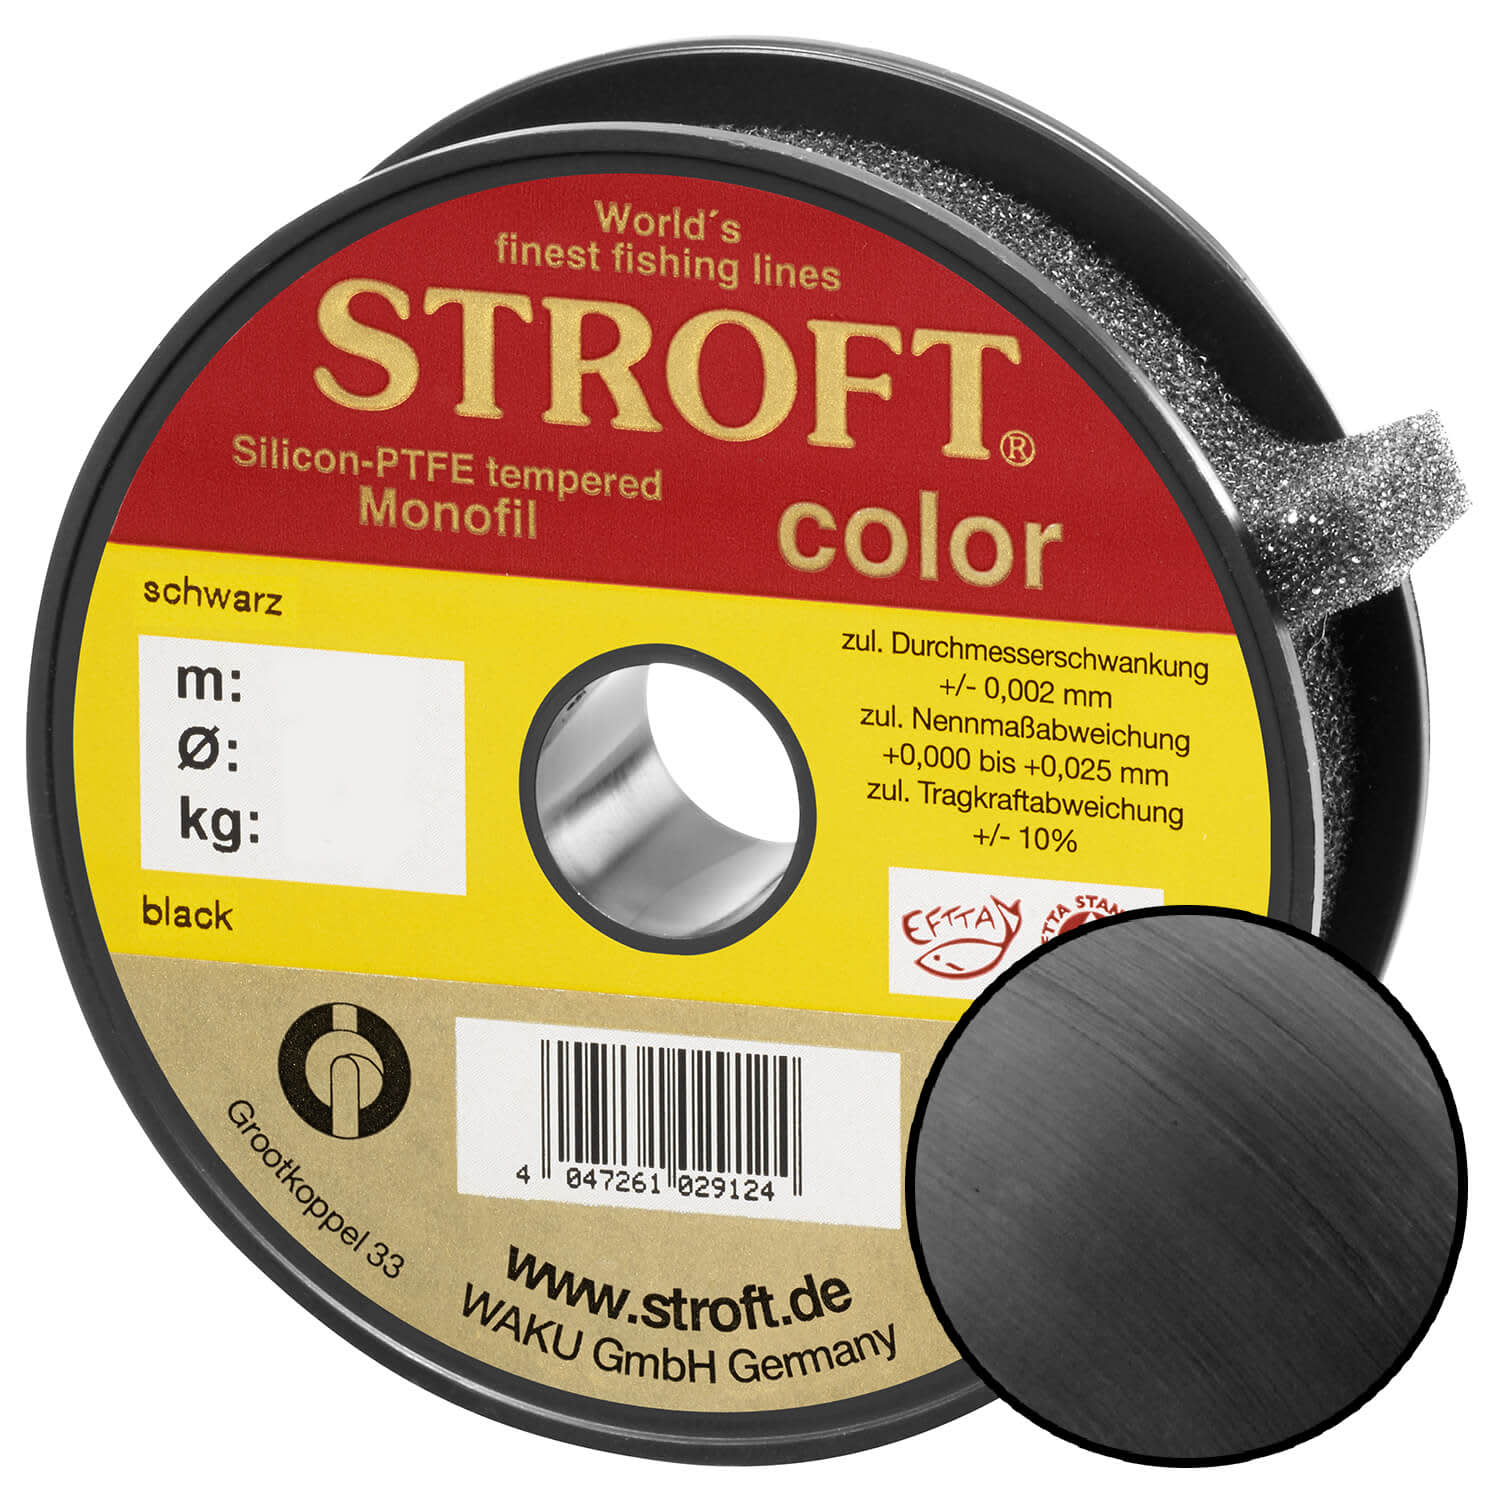 https://koeder-laden.mo.cloudinary.net/out/pictures/master/product/1/stroft-color-schnur-100m-schwarz.jpg